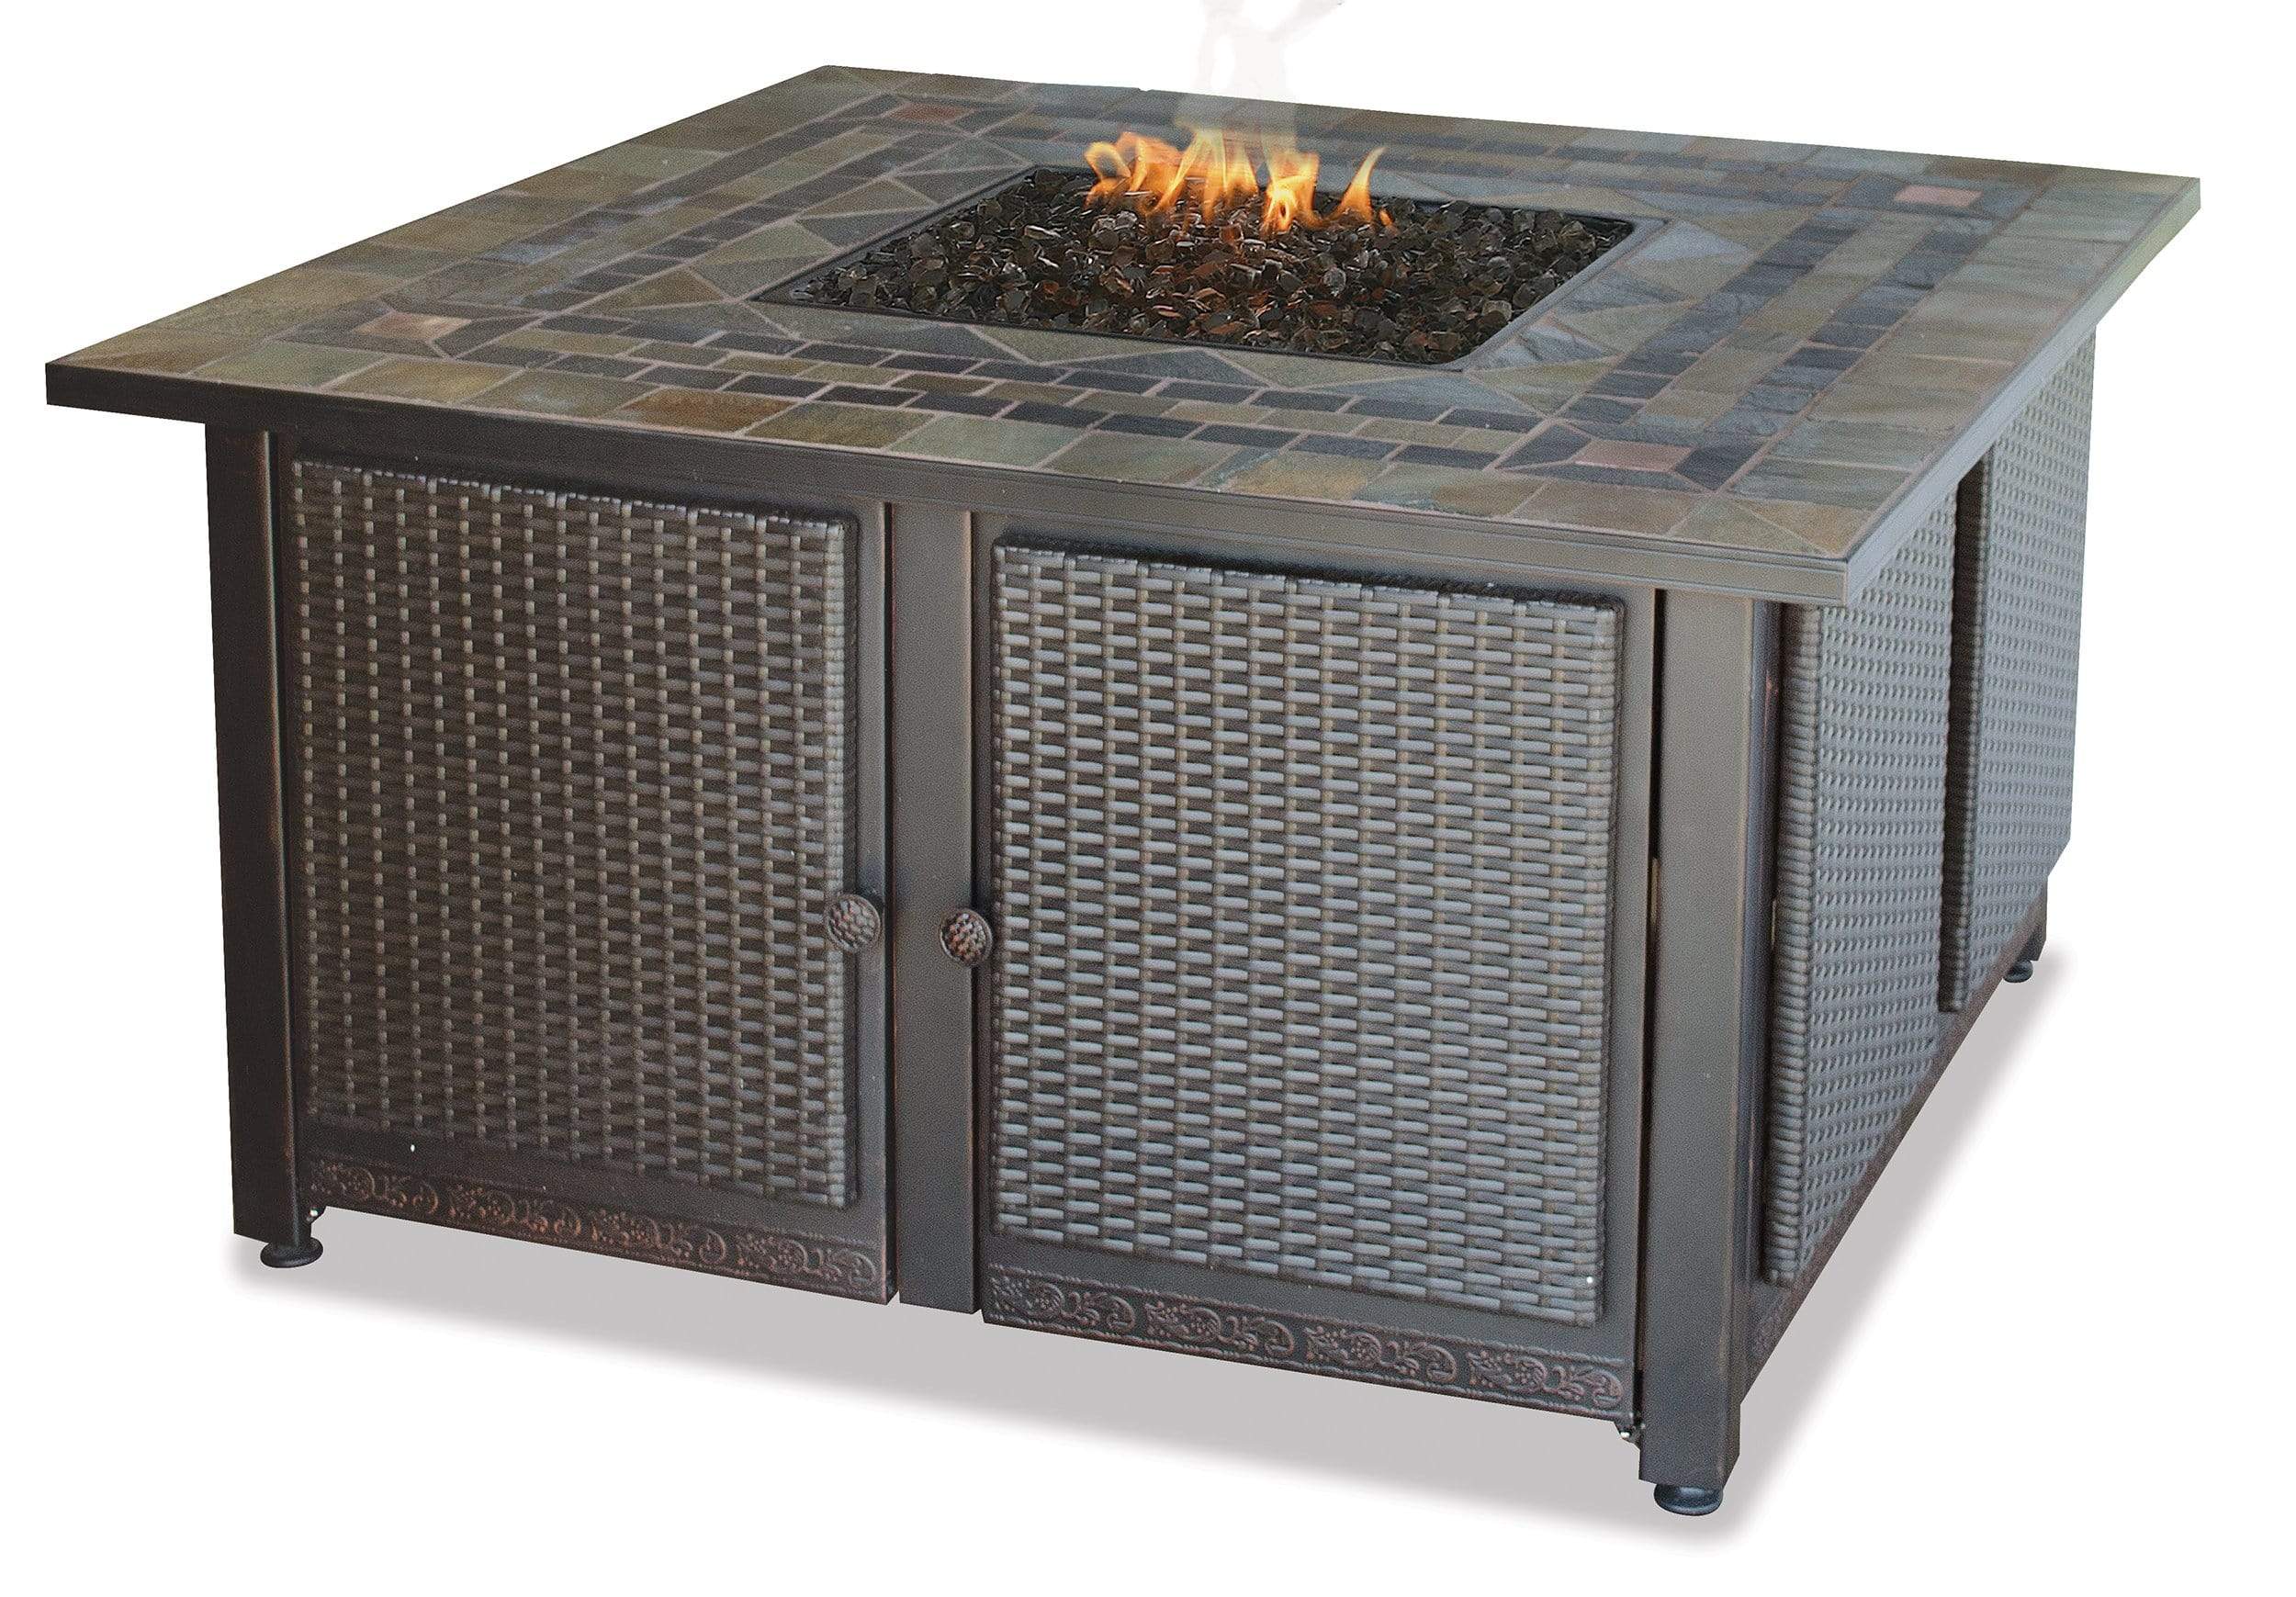 Endless Summer Fire Pit LP Gas Outdoor Fire Pit with 42-in. Slate Tile Mantel with Copper Accents